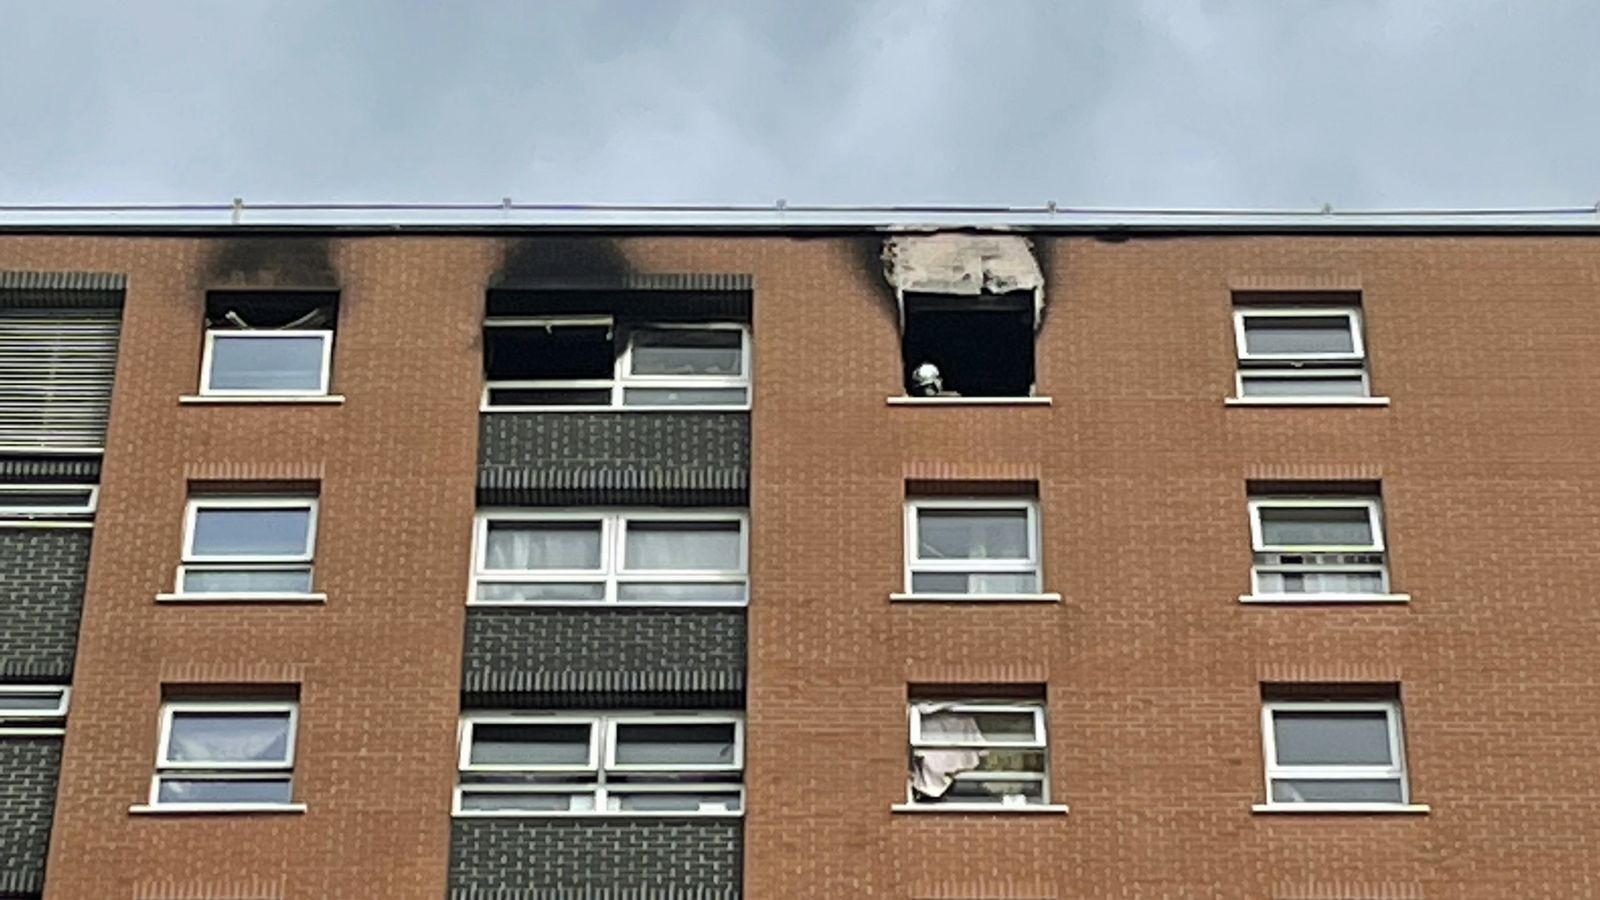 Electric bike caused Bristol tower block fire which resulted in man's death, investigators say